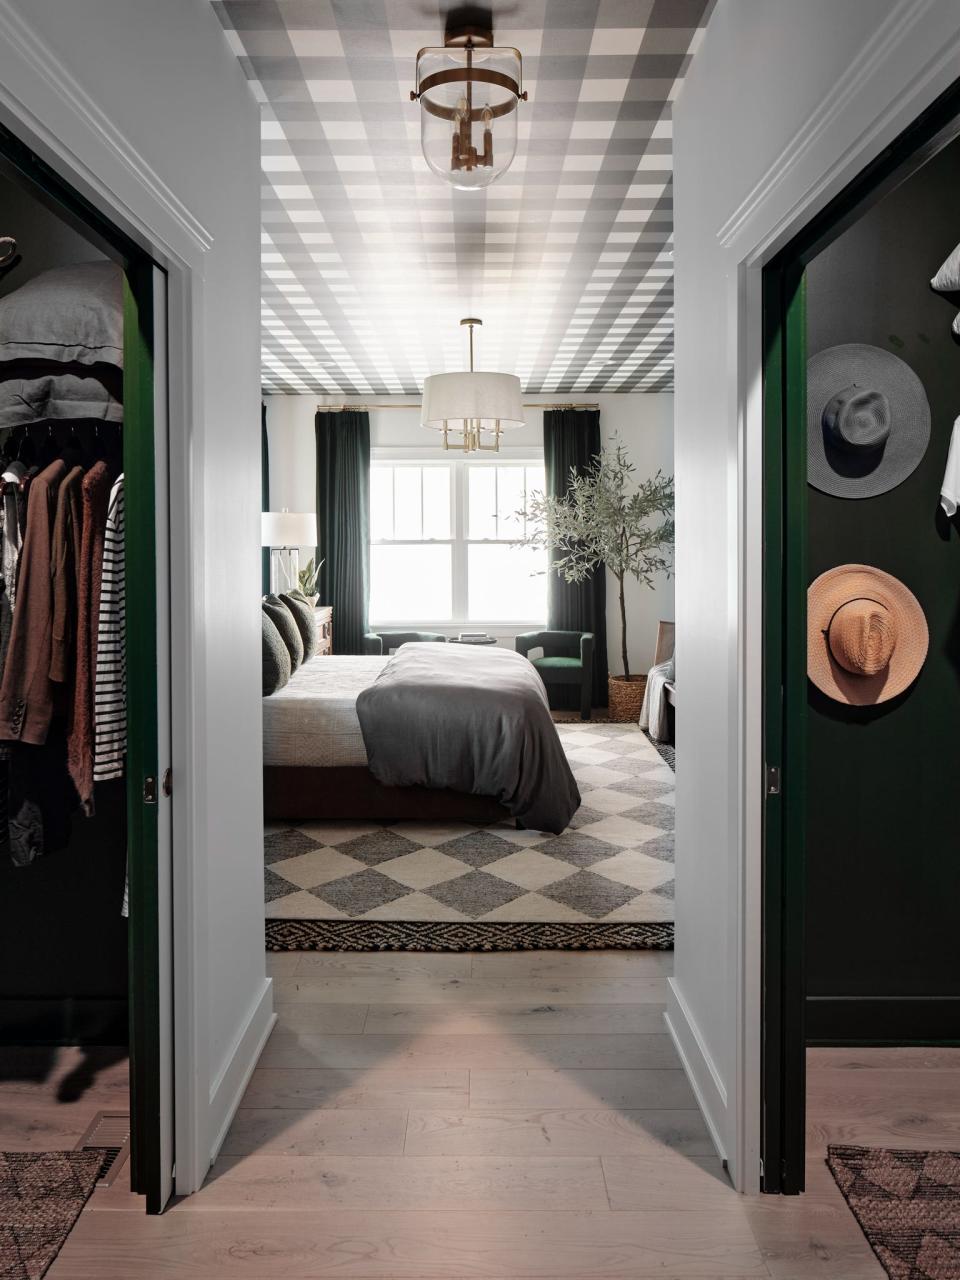 Built by Louisville’s Twin Spires Remodeling and decked out by HGTV interior designer Brian Patrick Flynn, the house is part of the HGTV Urban Oasis 2023 sweepstakes. Pictured here is the main bedroom closet space leading into the bedroom.